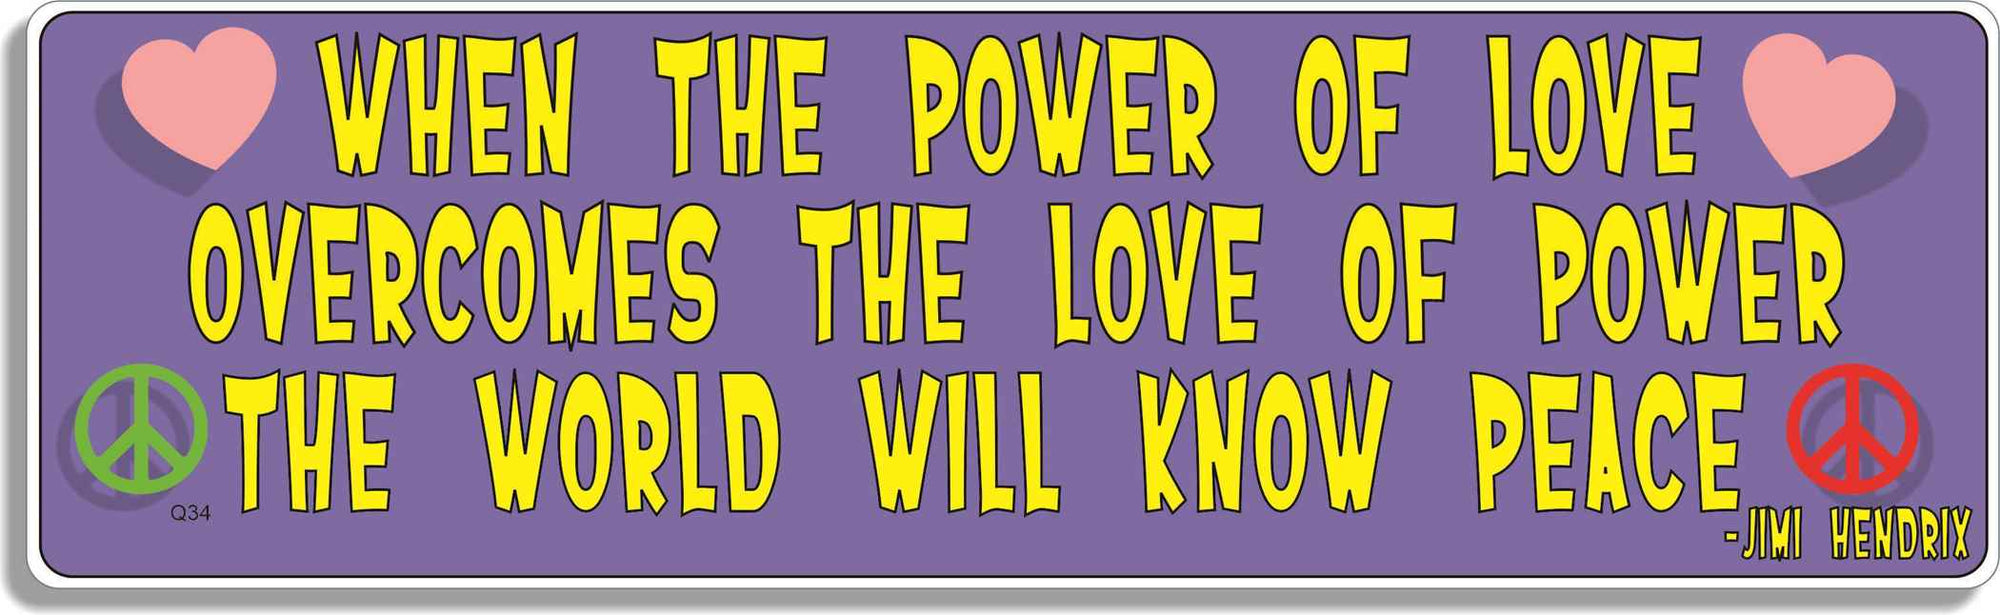 When The Power Of Love... -Jimi Hendrix -  3" x 10" Bumper Sticker--Car Magnet- -  Decal Bumper Sticker-quotation Bumper Sticker Car Magnet When The Power Of Love...-Jimi Hendrix-  Decal for cars music